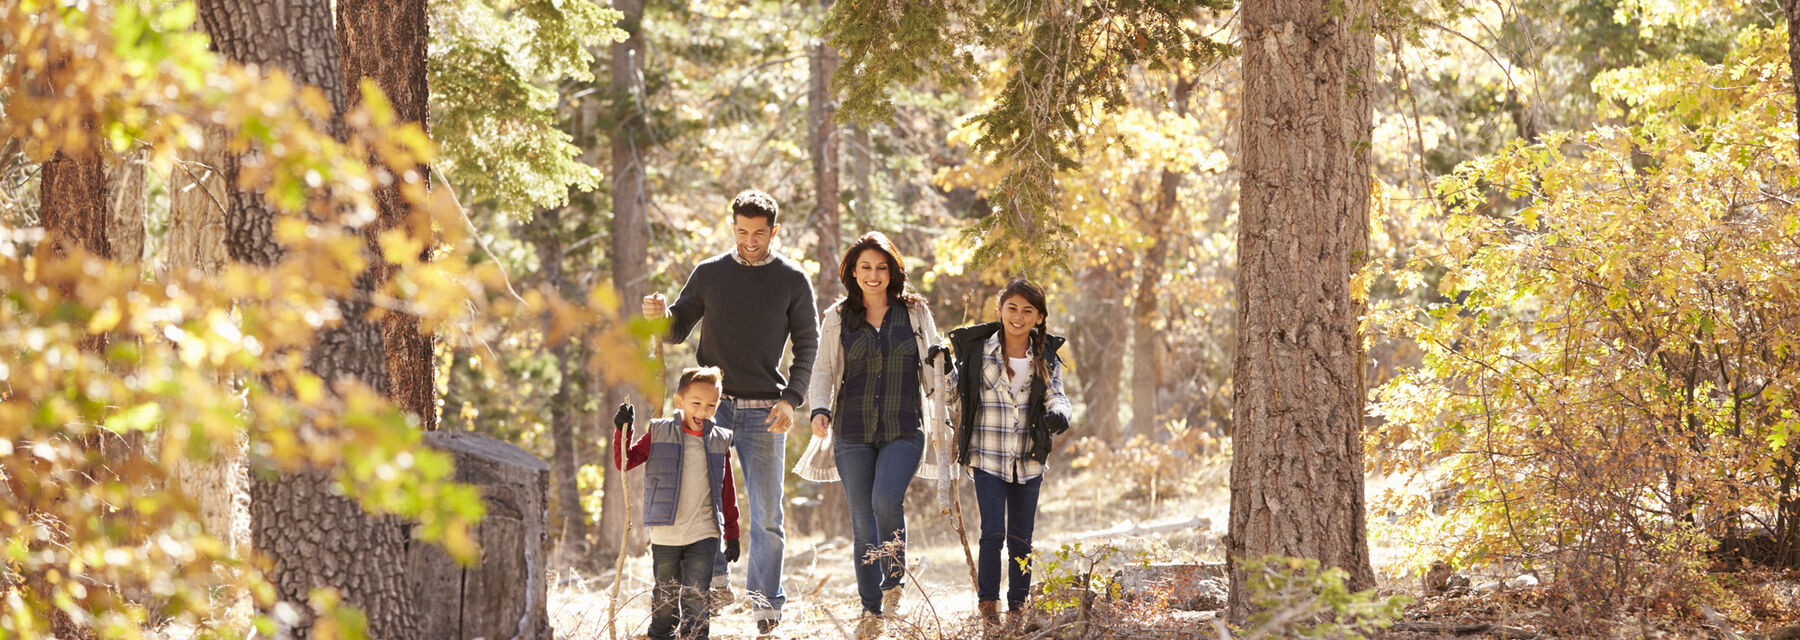 A family walks through the woods on a sunny autumn day. The leaves on the trees are a golden yellow.